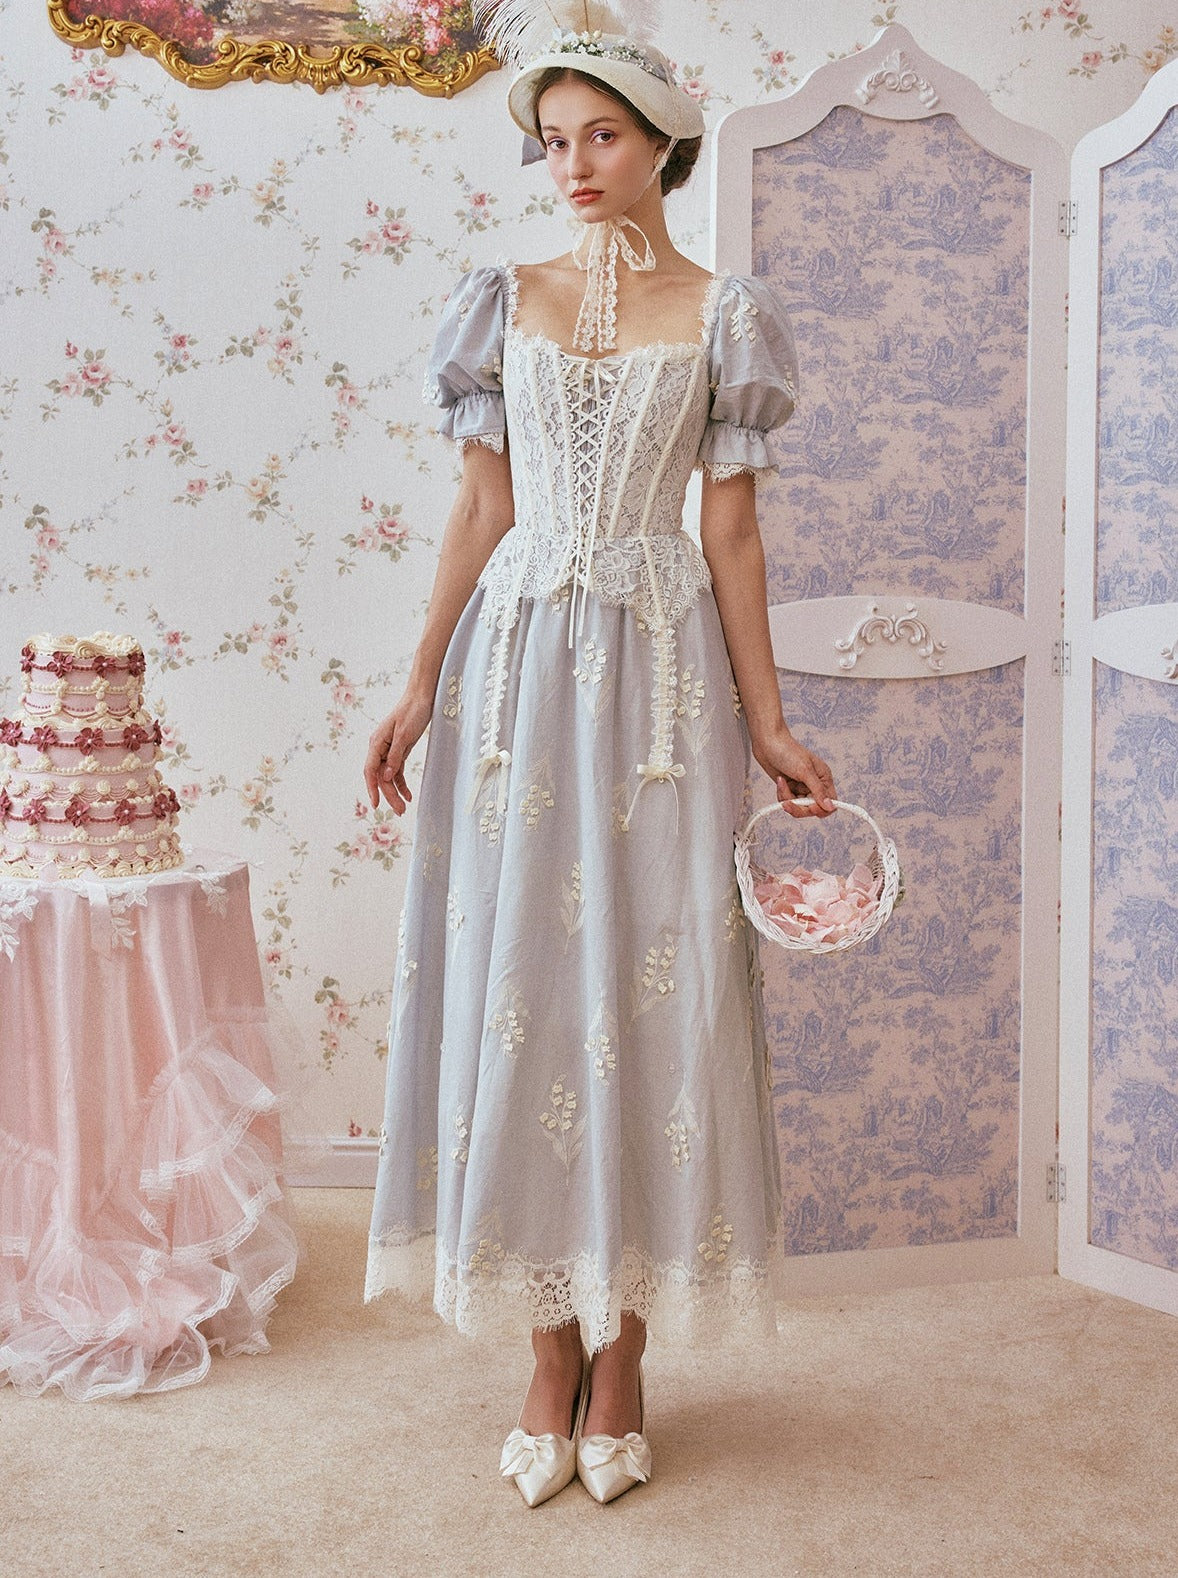 Princess French Country Dress + Scarf